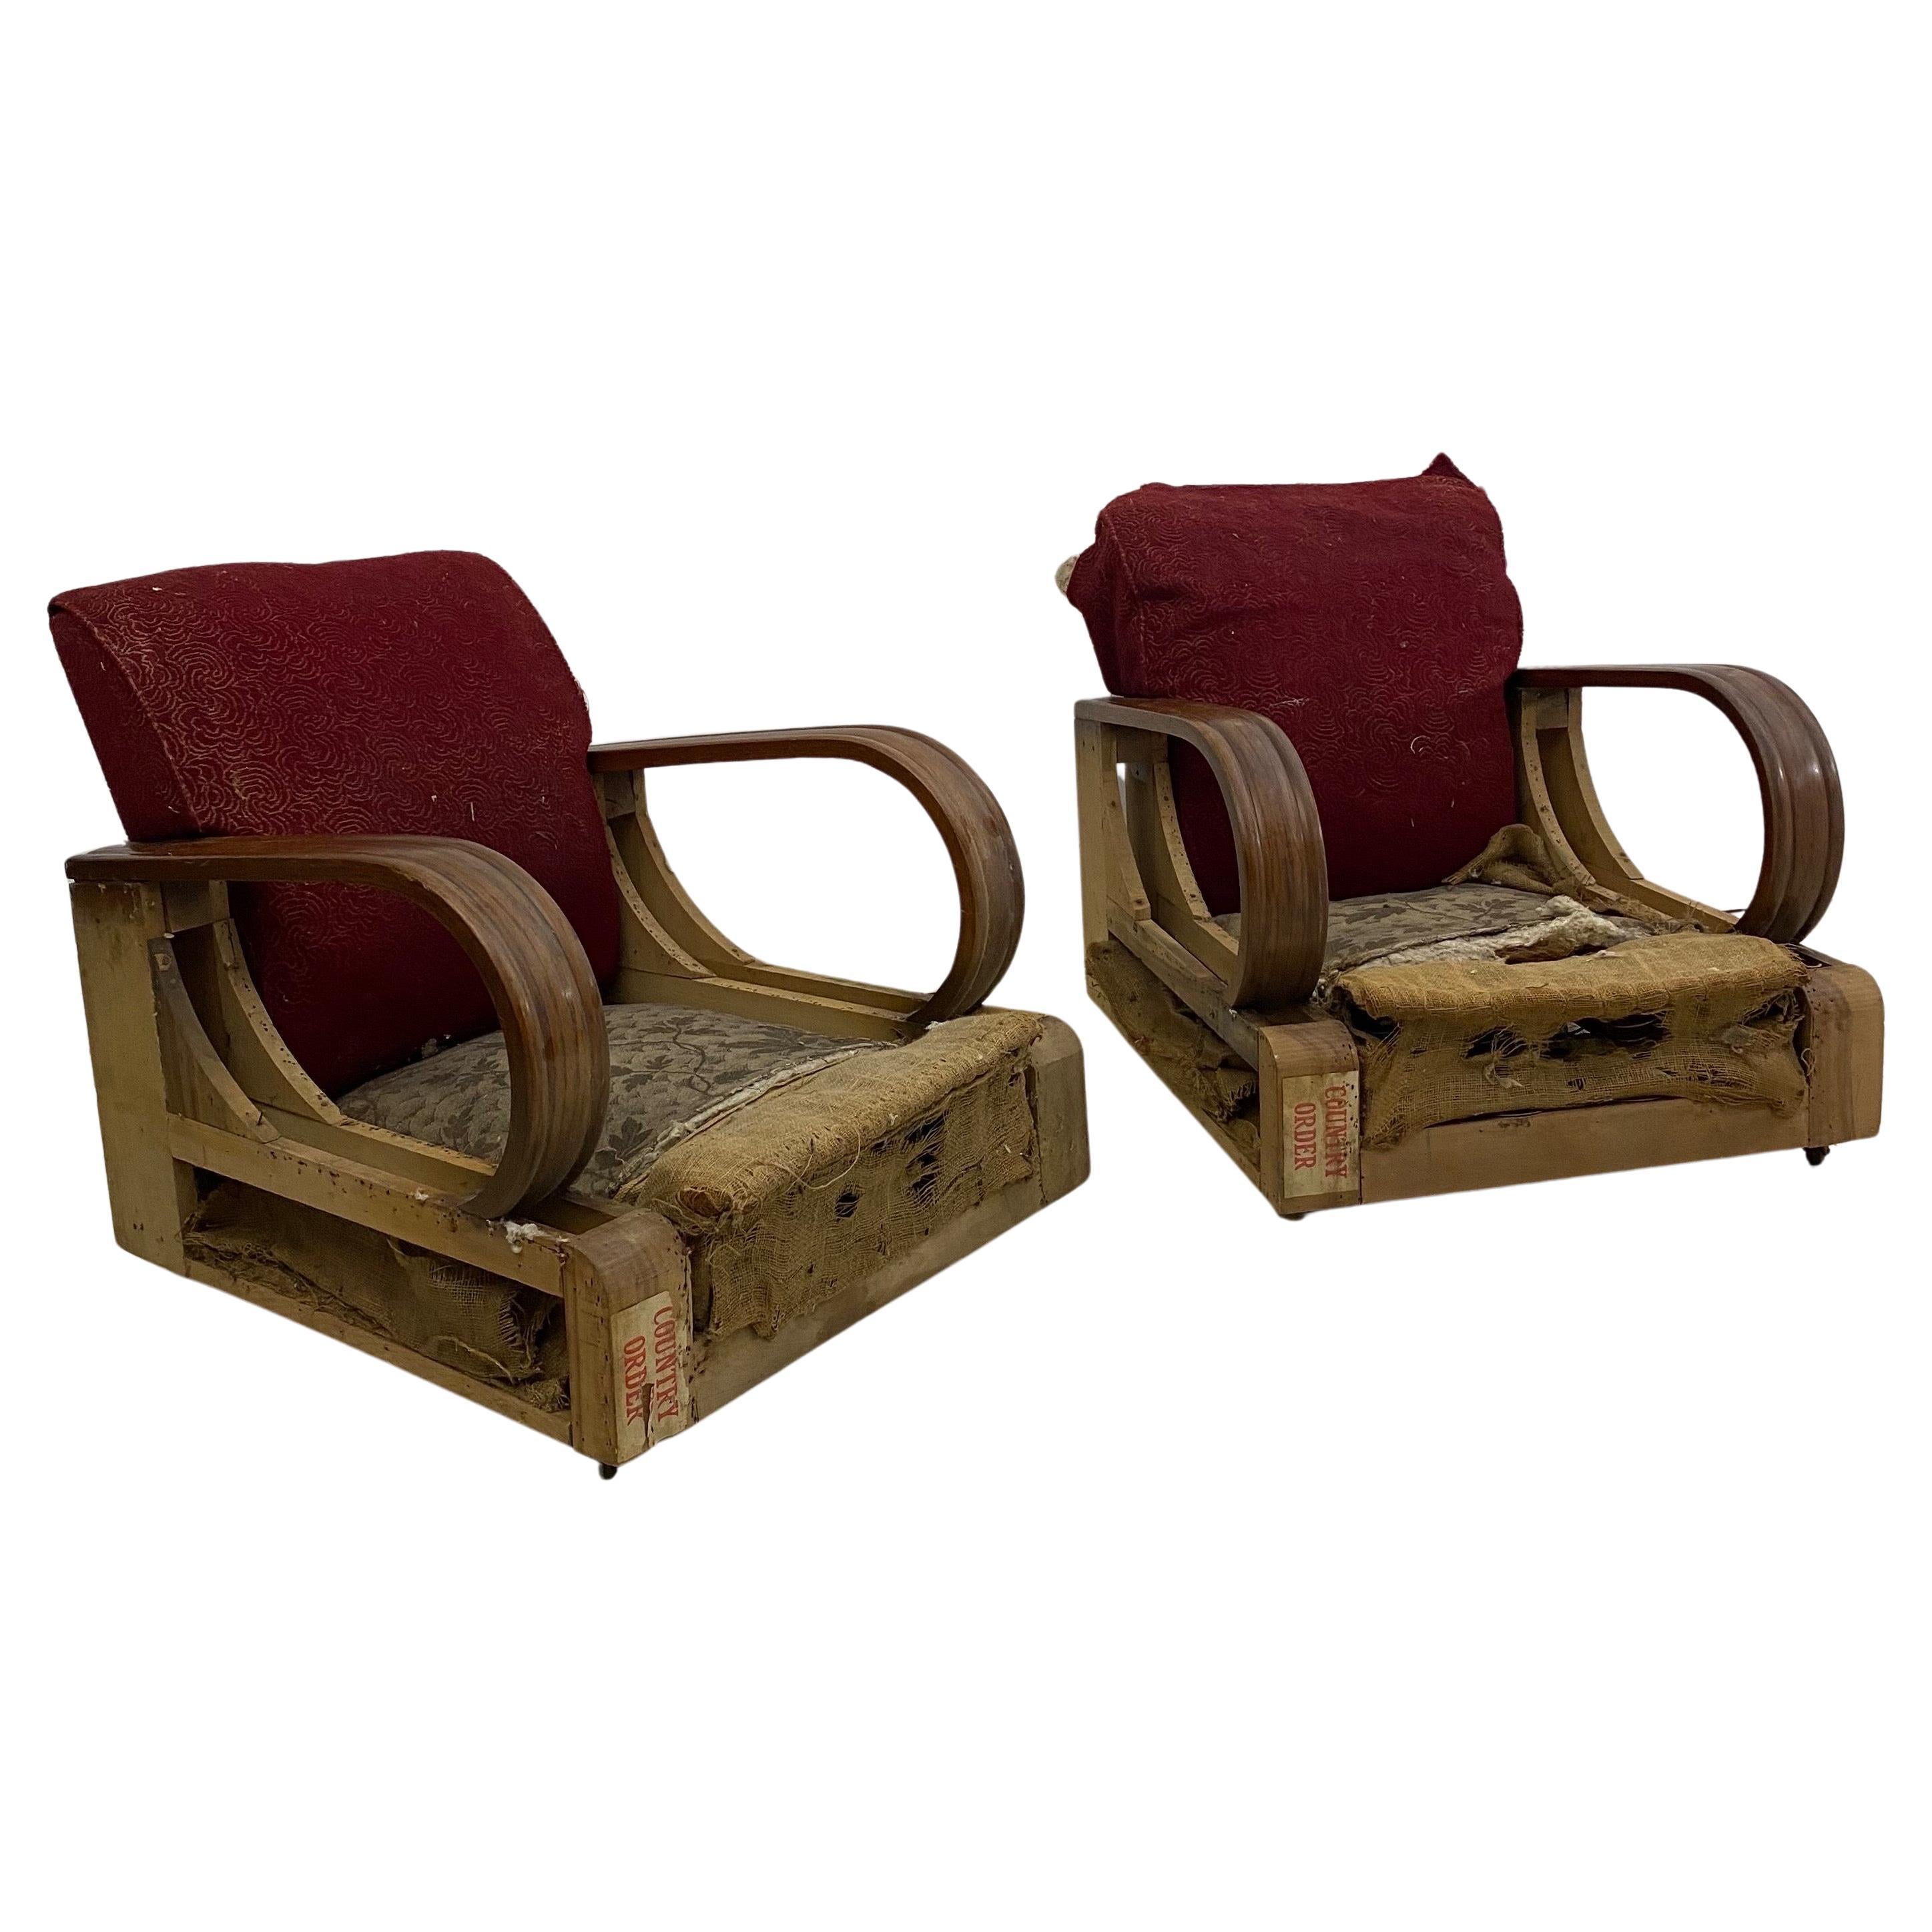 Art Deco 1940s Pair Red Distressed Armchairs Restoration Project As Seen Poirot For Sale